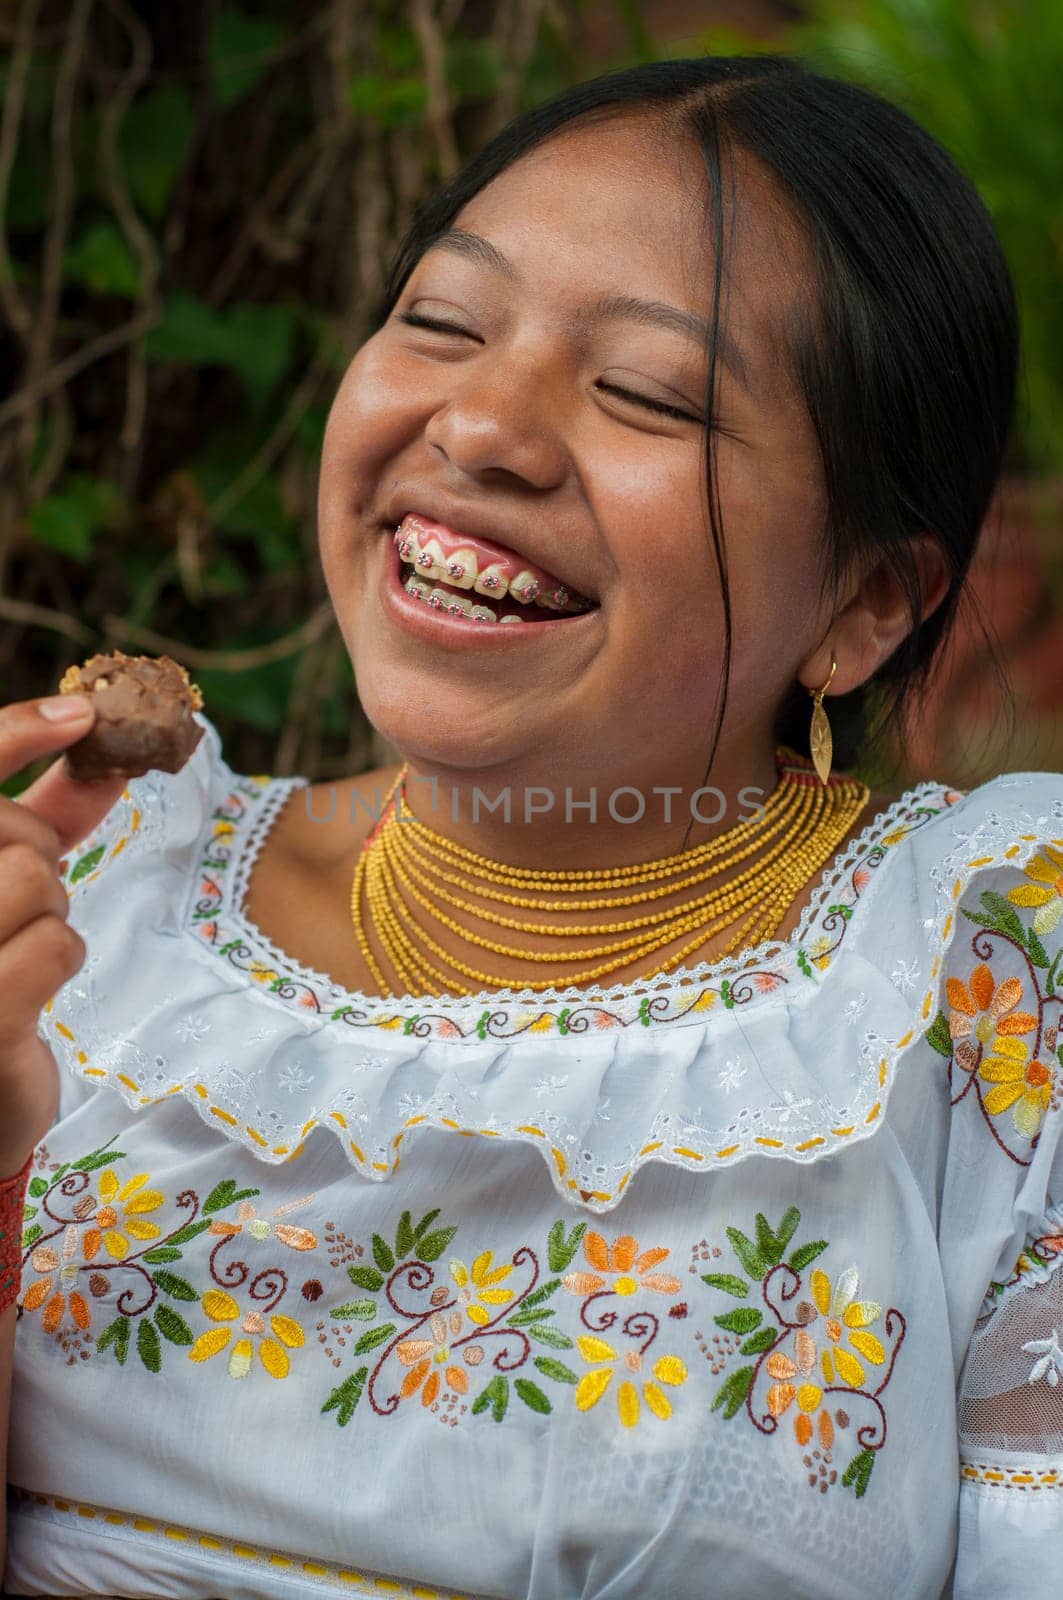 A cheerful young Indian girl with braces is captured in a moment of pure happiness as she enjoys a sweet treat outdoors, dressed in traditional embroidered clothing. High quality photo